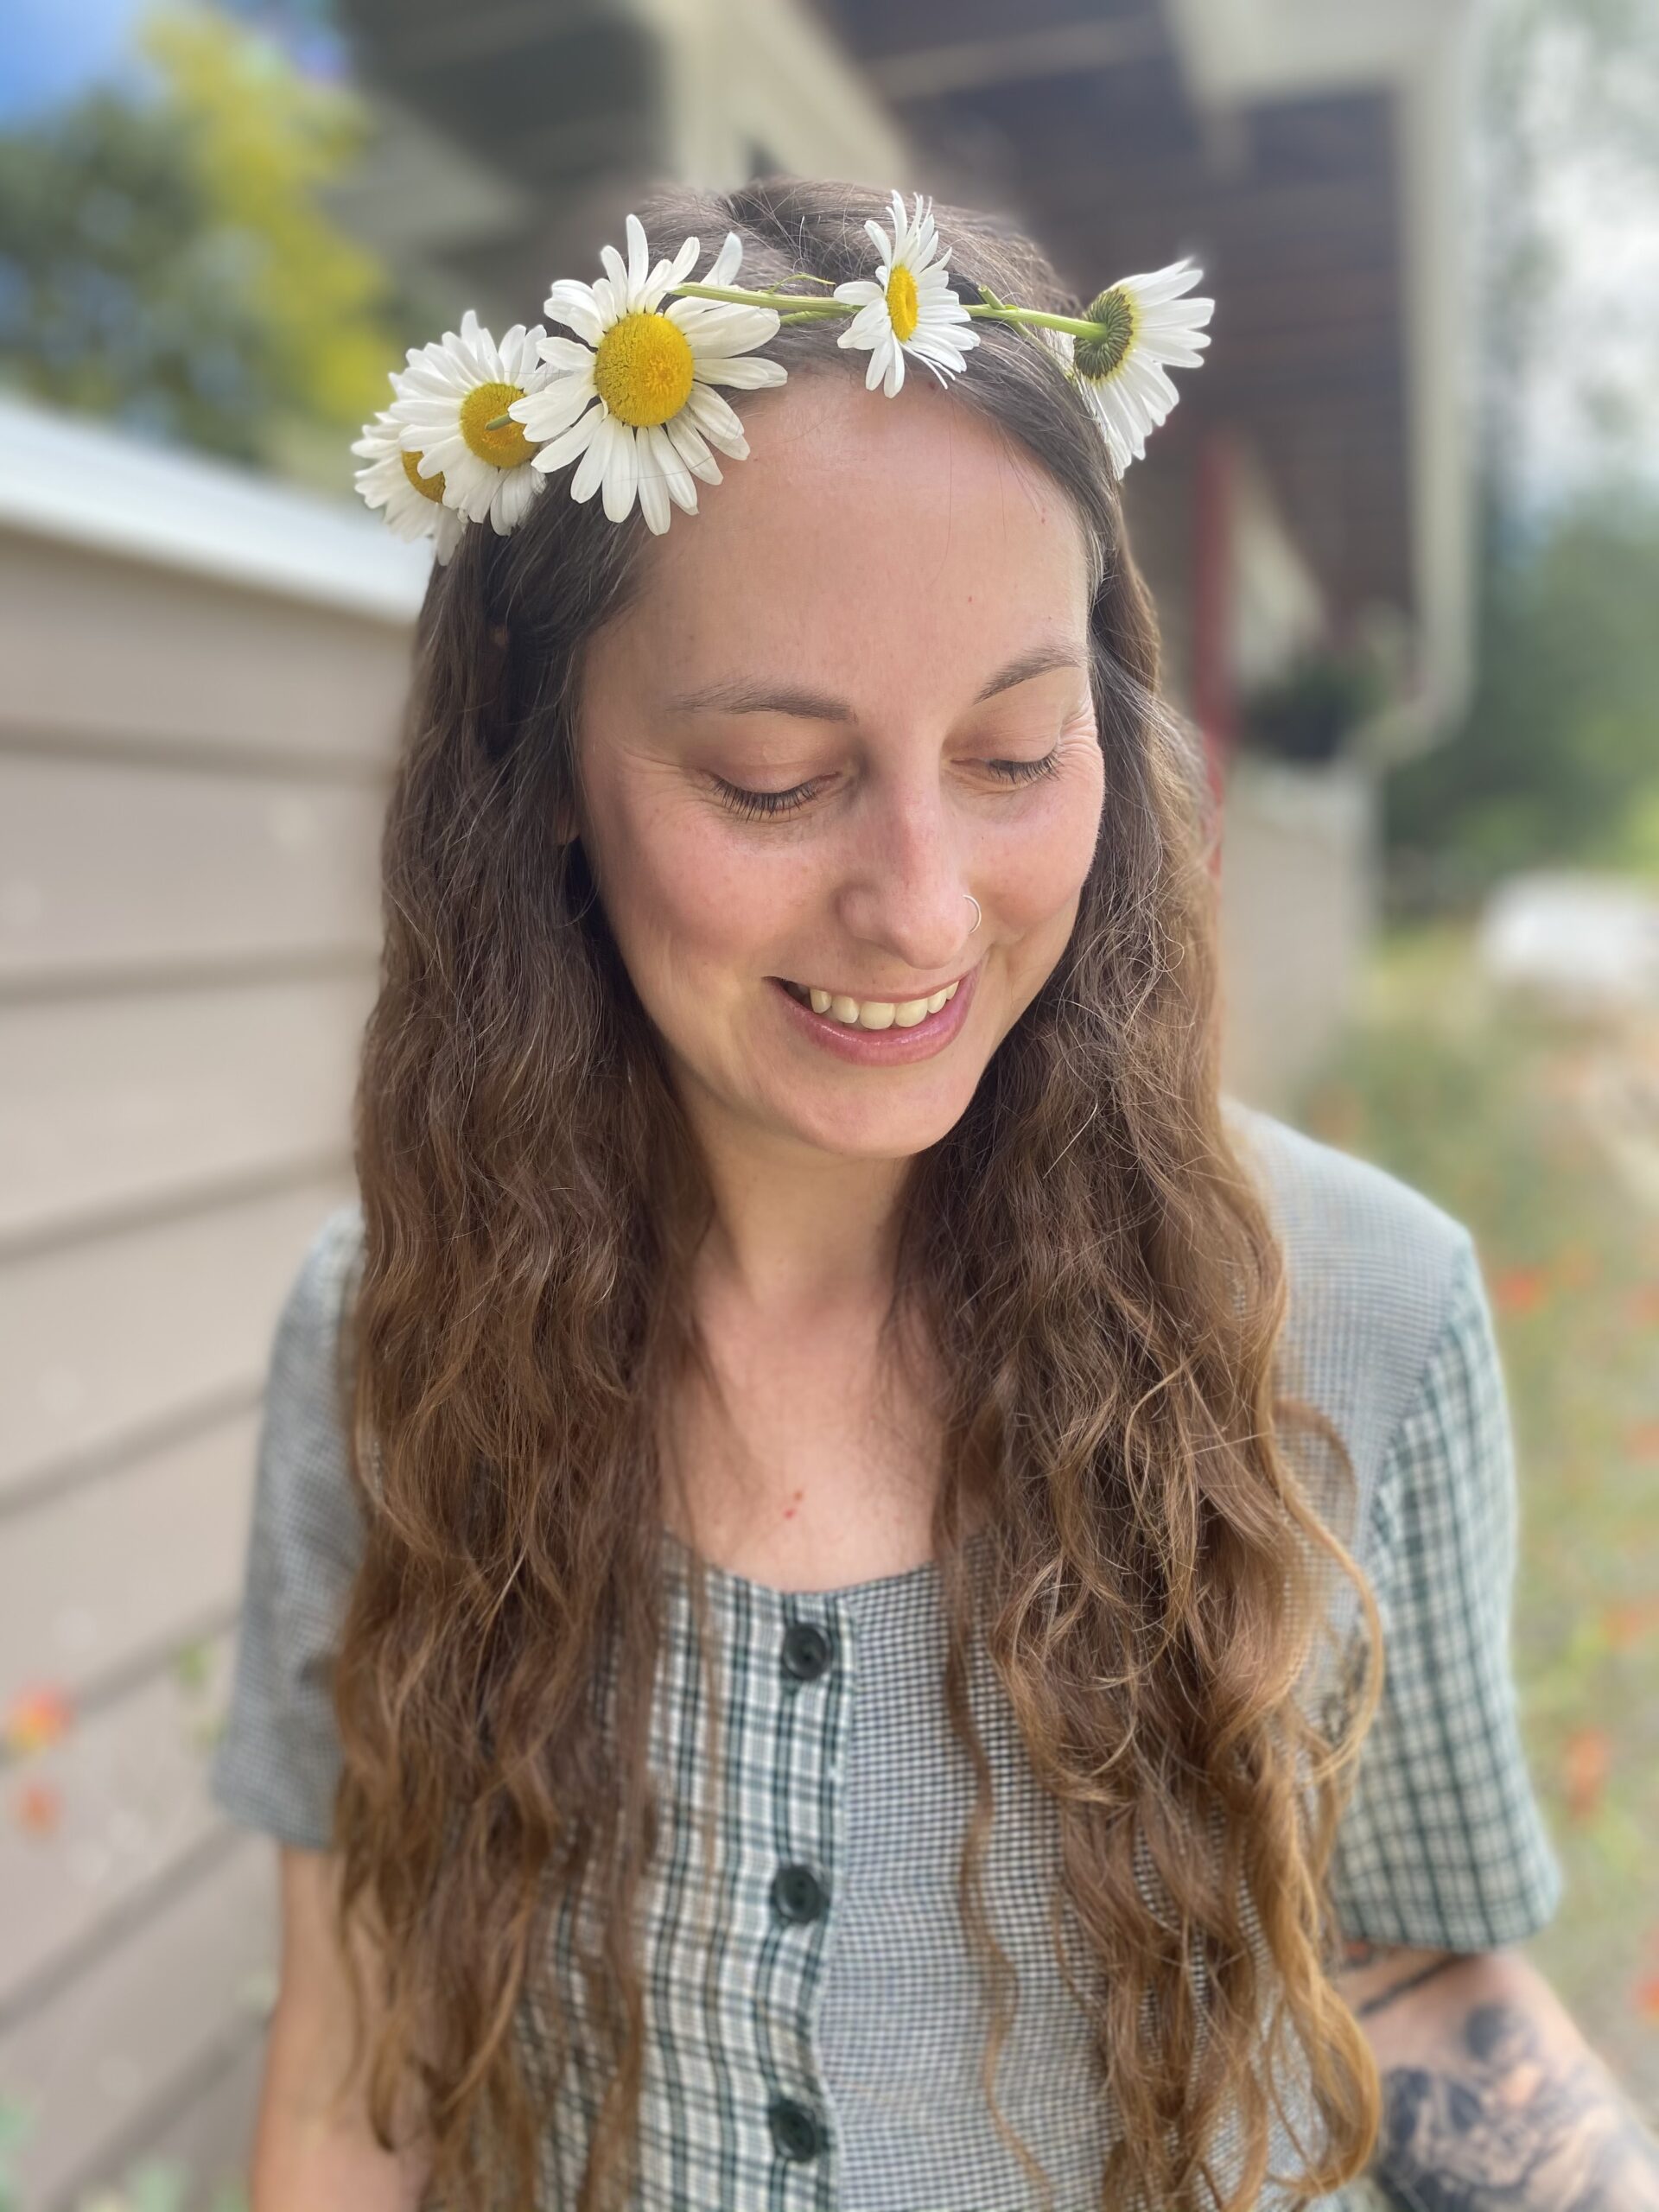 Photo of Madeline Christie, woman with long wavy hair and a crown of daisies on her head